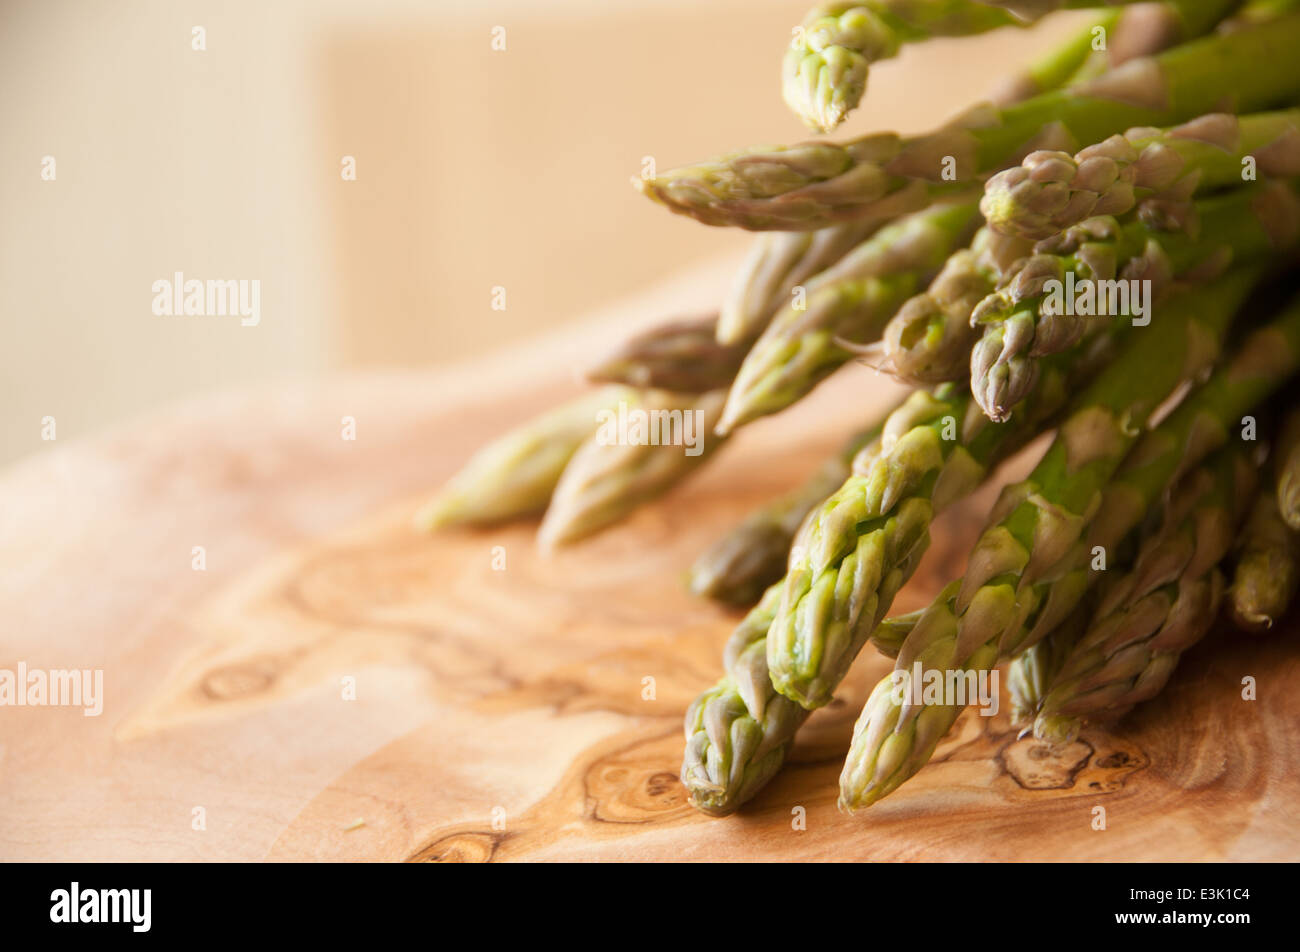 Fresh organic asparagus bunched together on a wooden chopping board Stock Photo